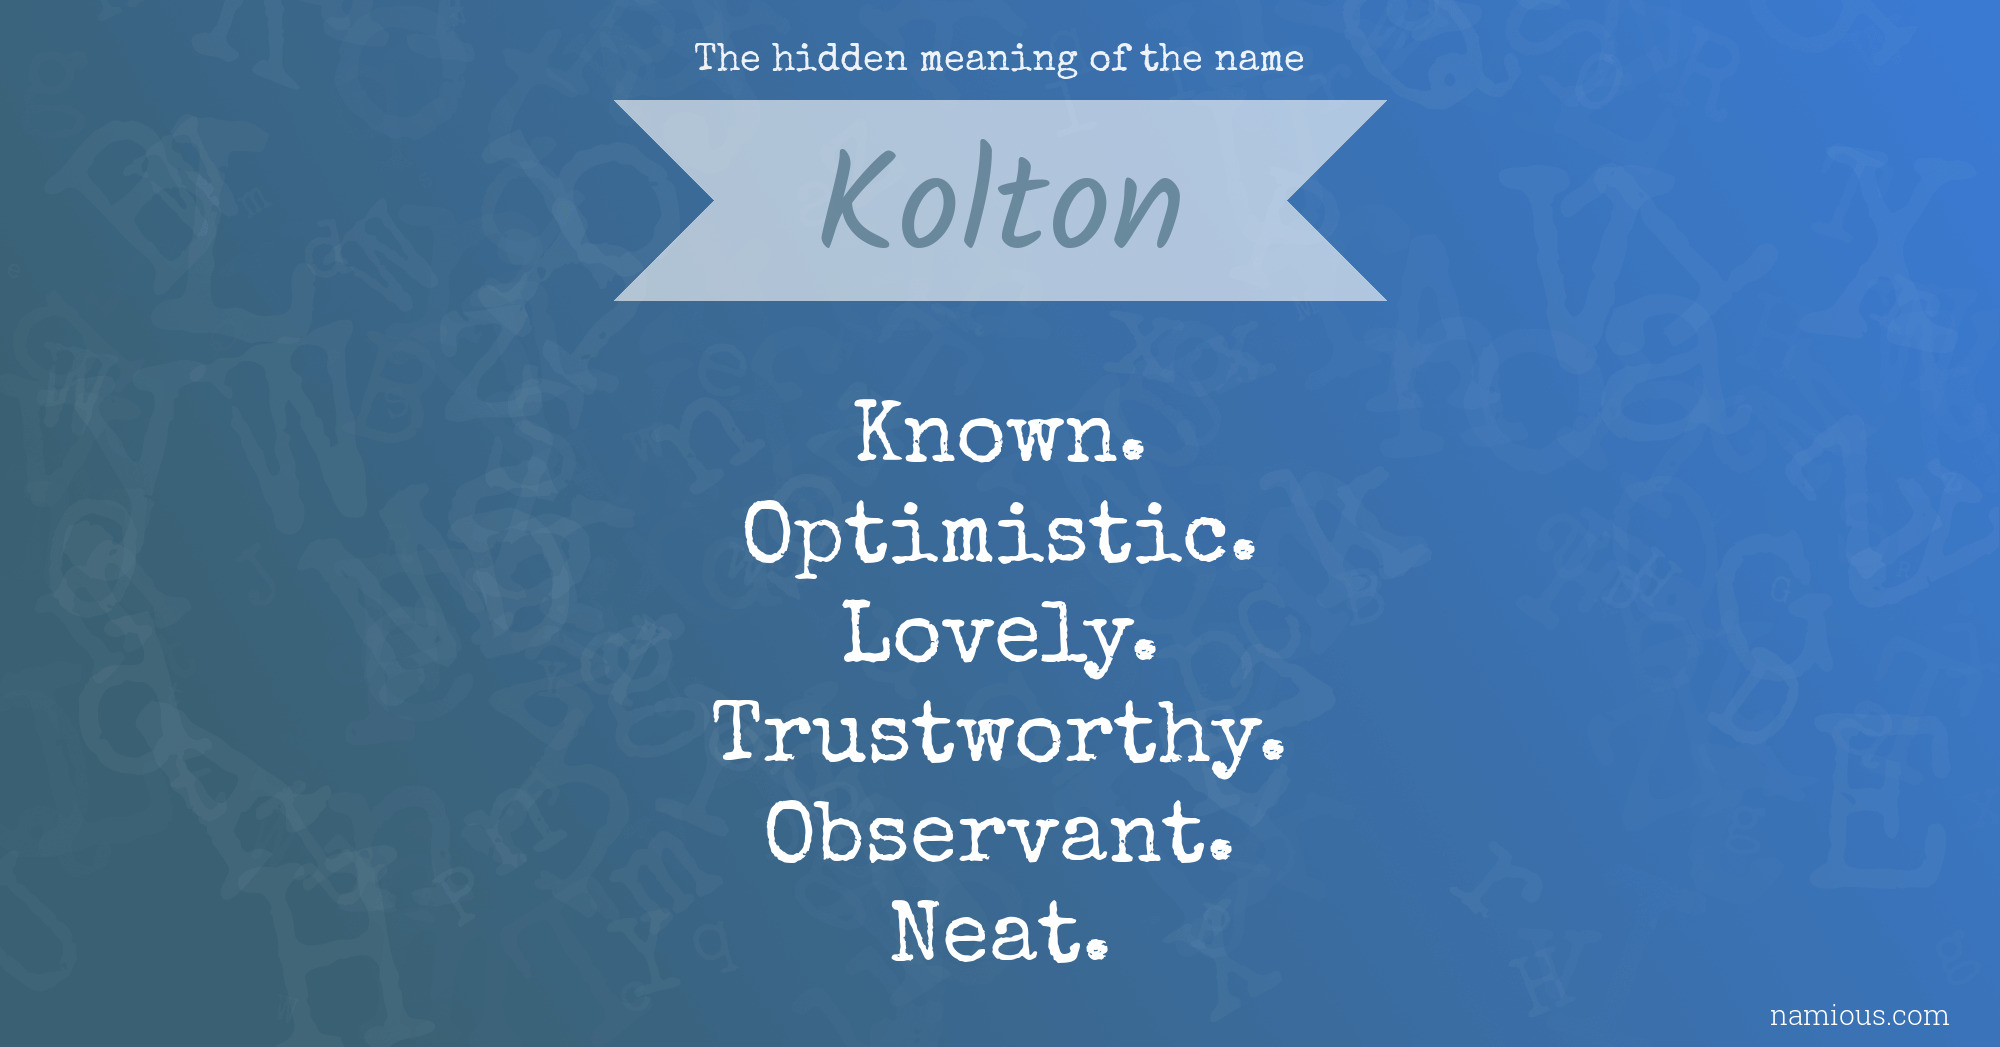 The hidden meaning of the name Kolton